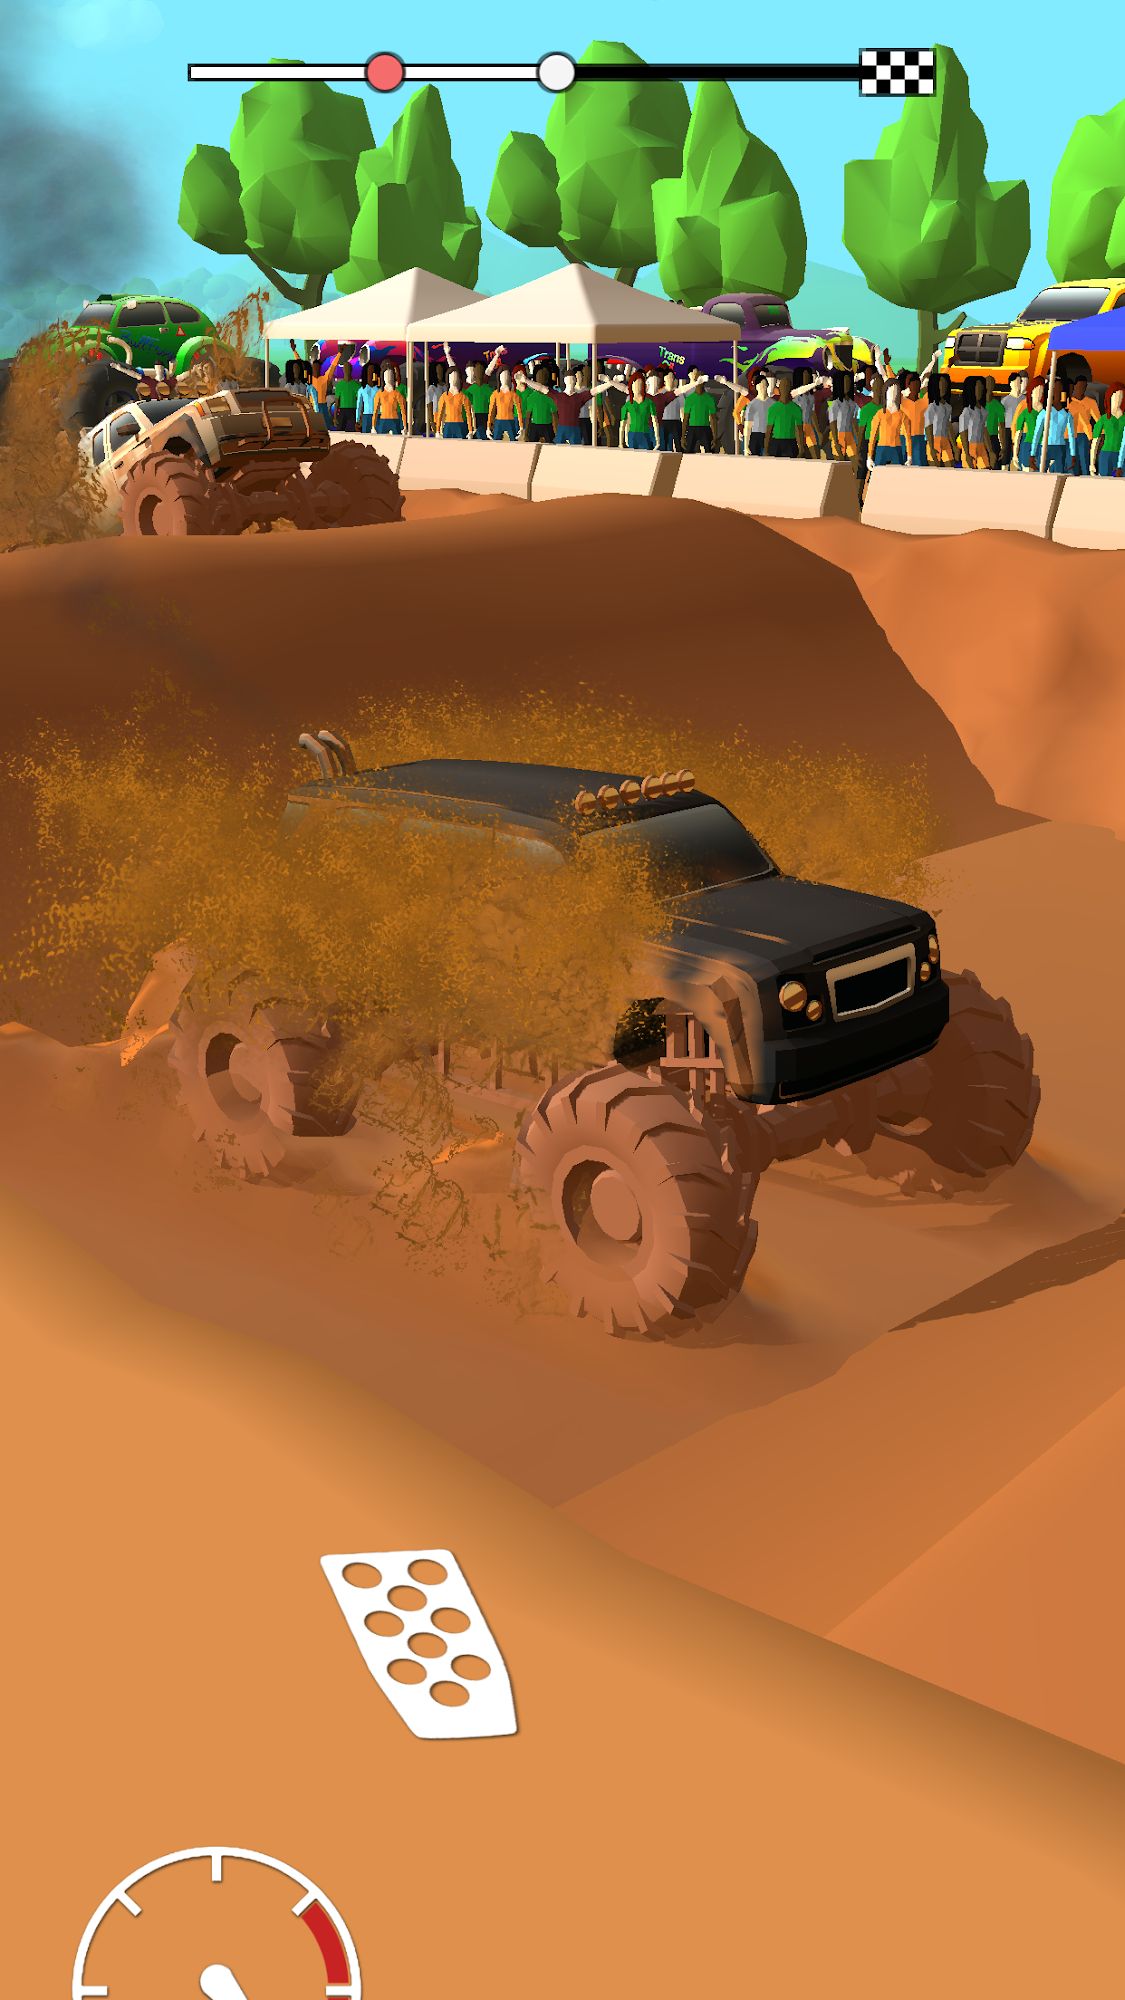 Télécharger Mud Racing: 4х4 Monster Truck Off-Road simulator pour Android gratuit.